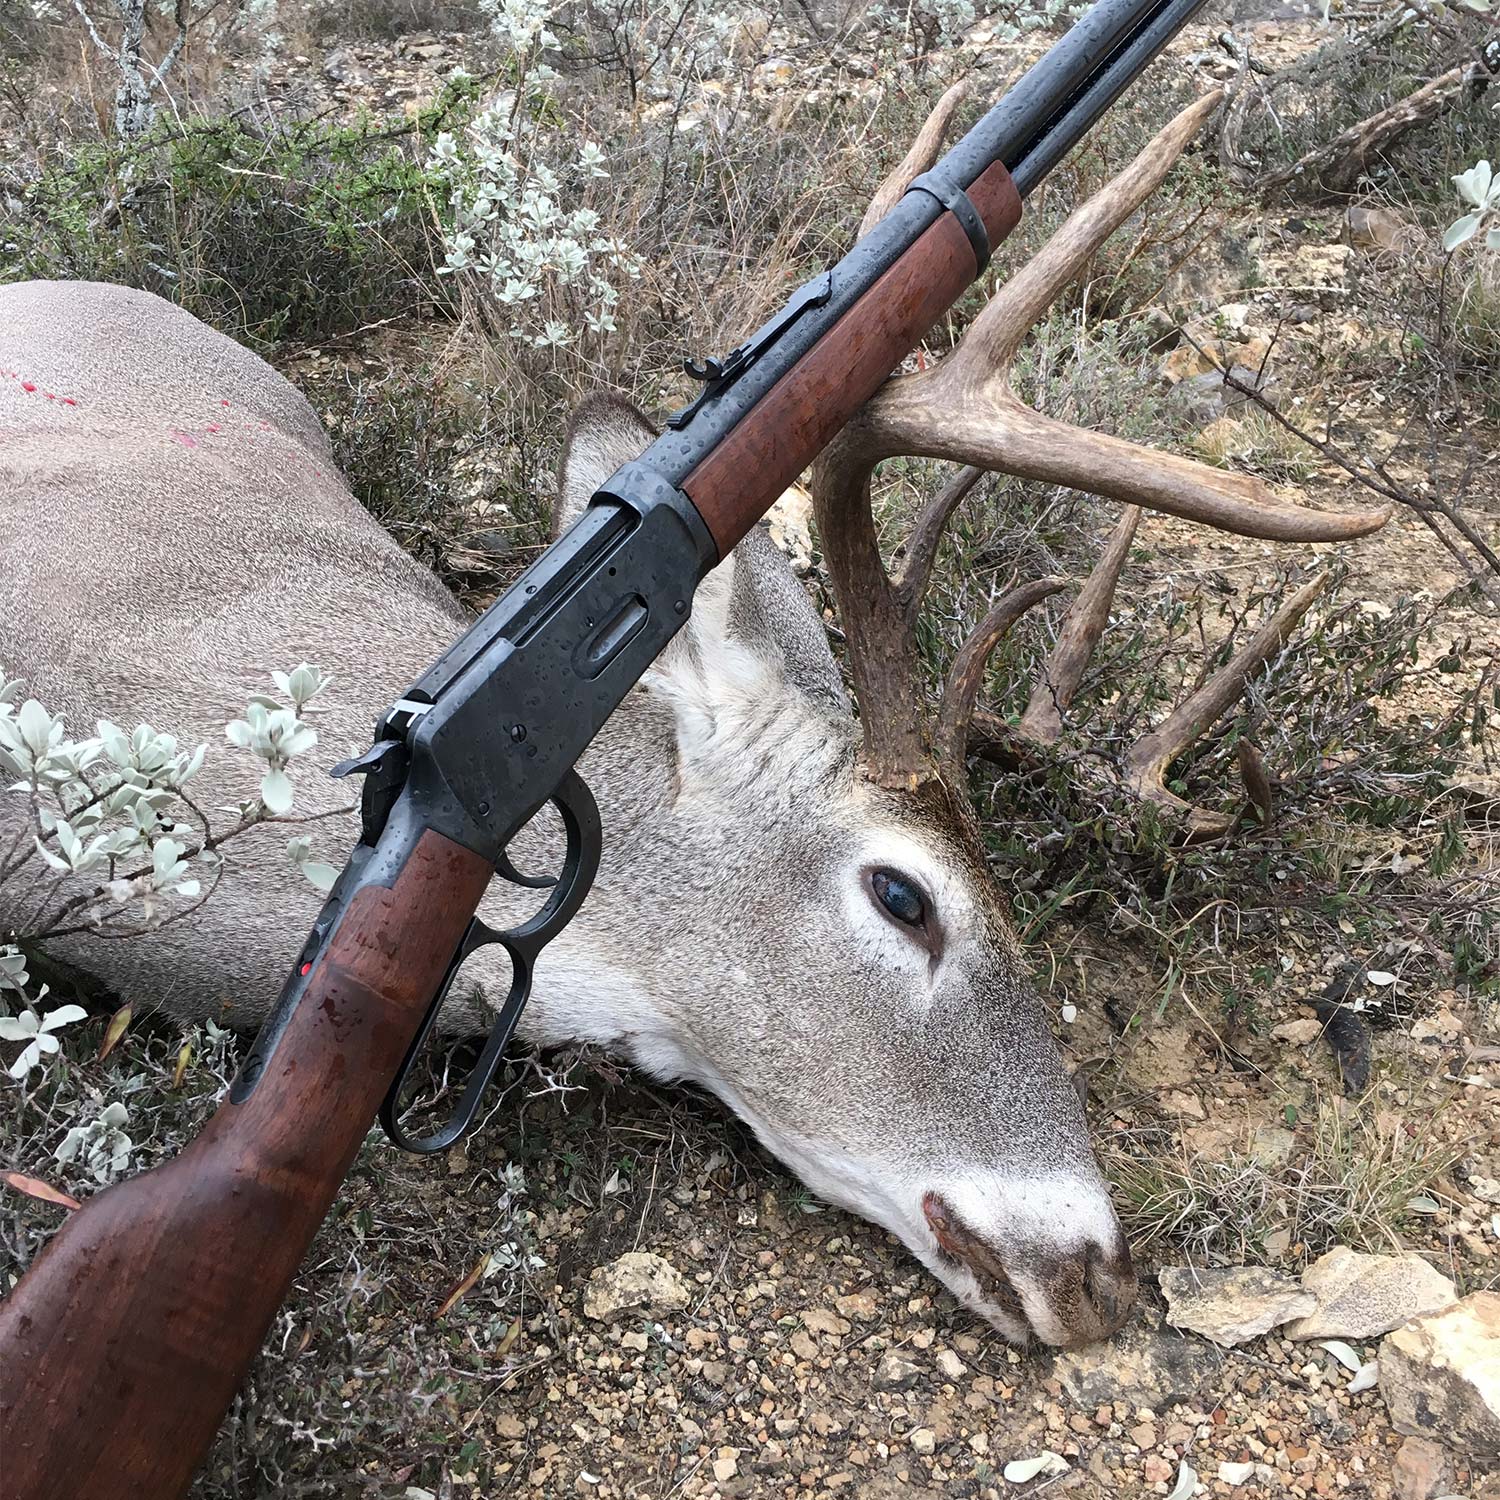 The Model 94 lever action rifle and deer.